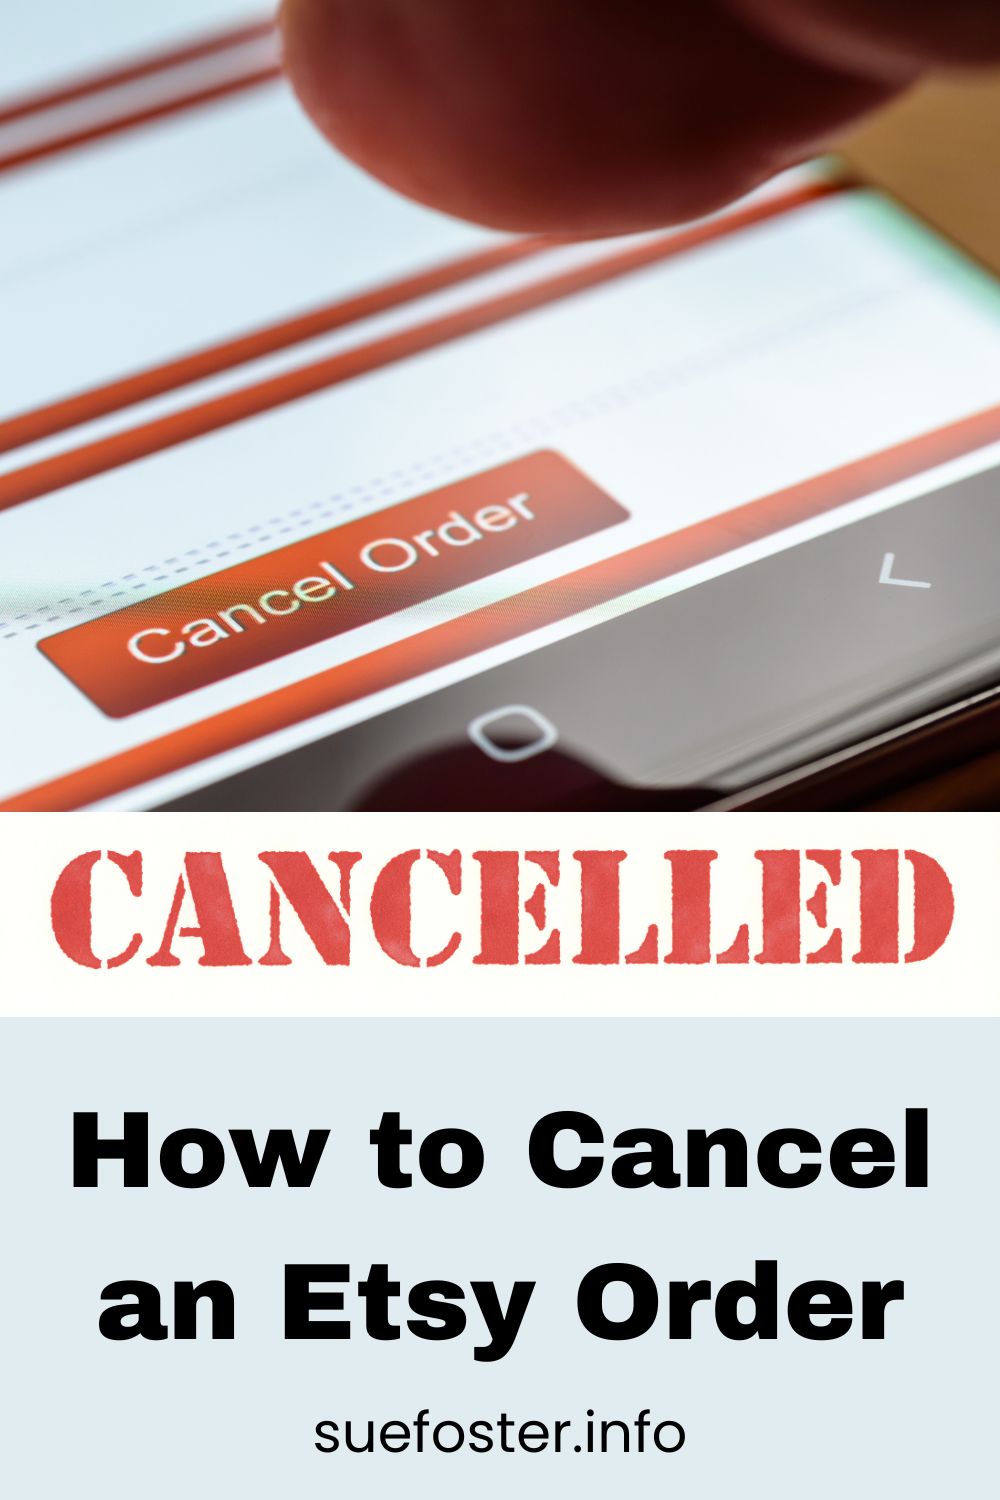 Discover the process of cancelling Etsy orders in this guide, covering steps for buyers, guests, and sellers, along with tips for handling digital items.